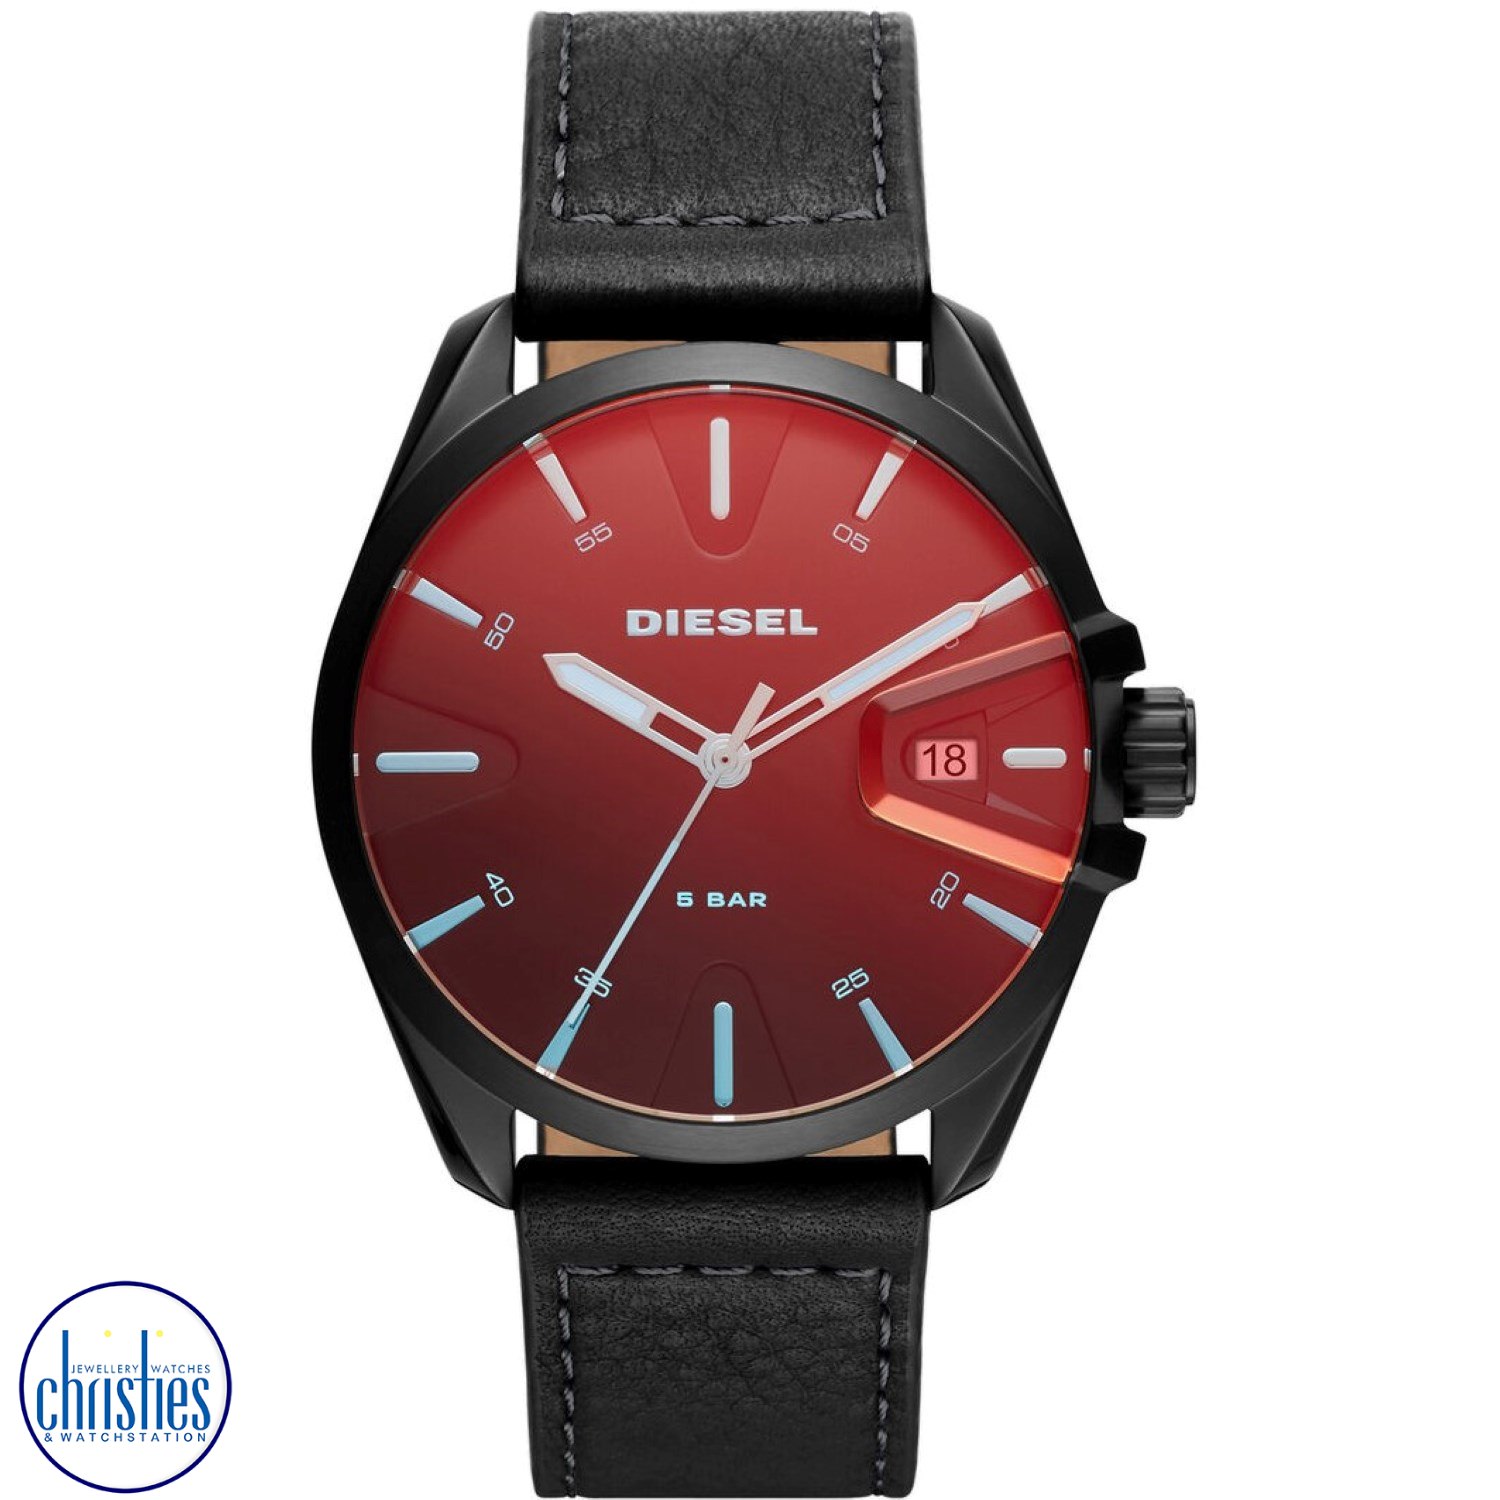 DZ1945 - MS9 Three-Hand Date Black Leather Watch. The Diesel DZ1945 is a sleek and sophisticated timepiece that combines classic design elements with modern functionality.